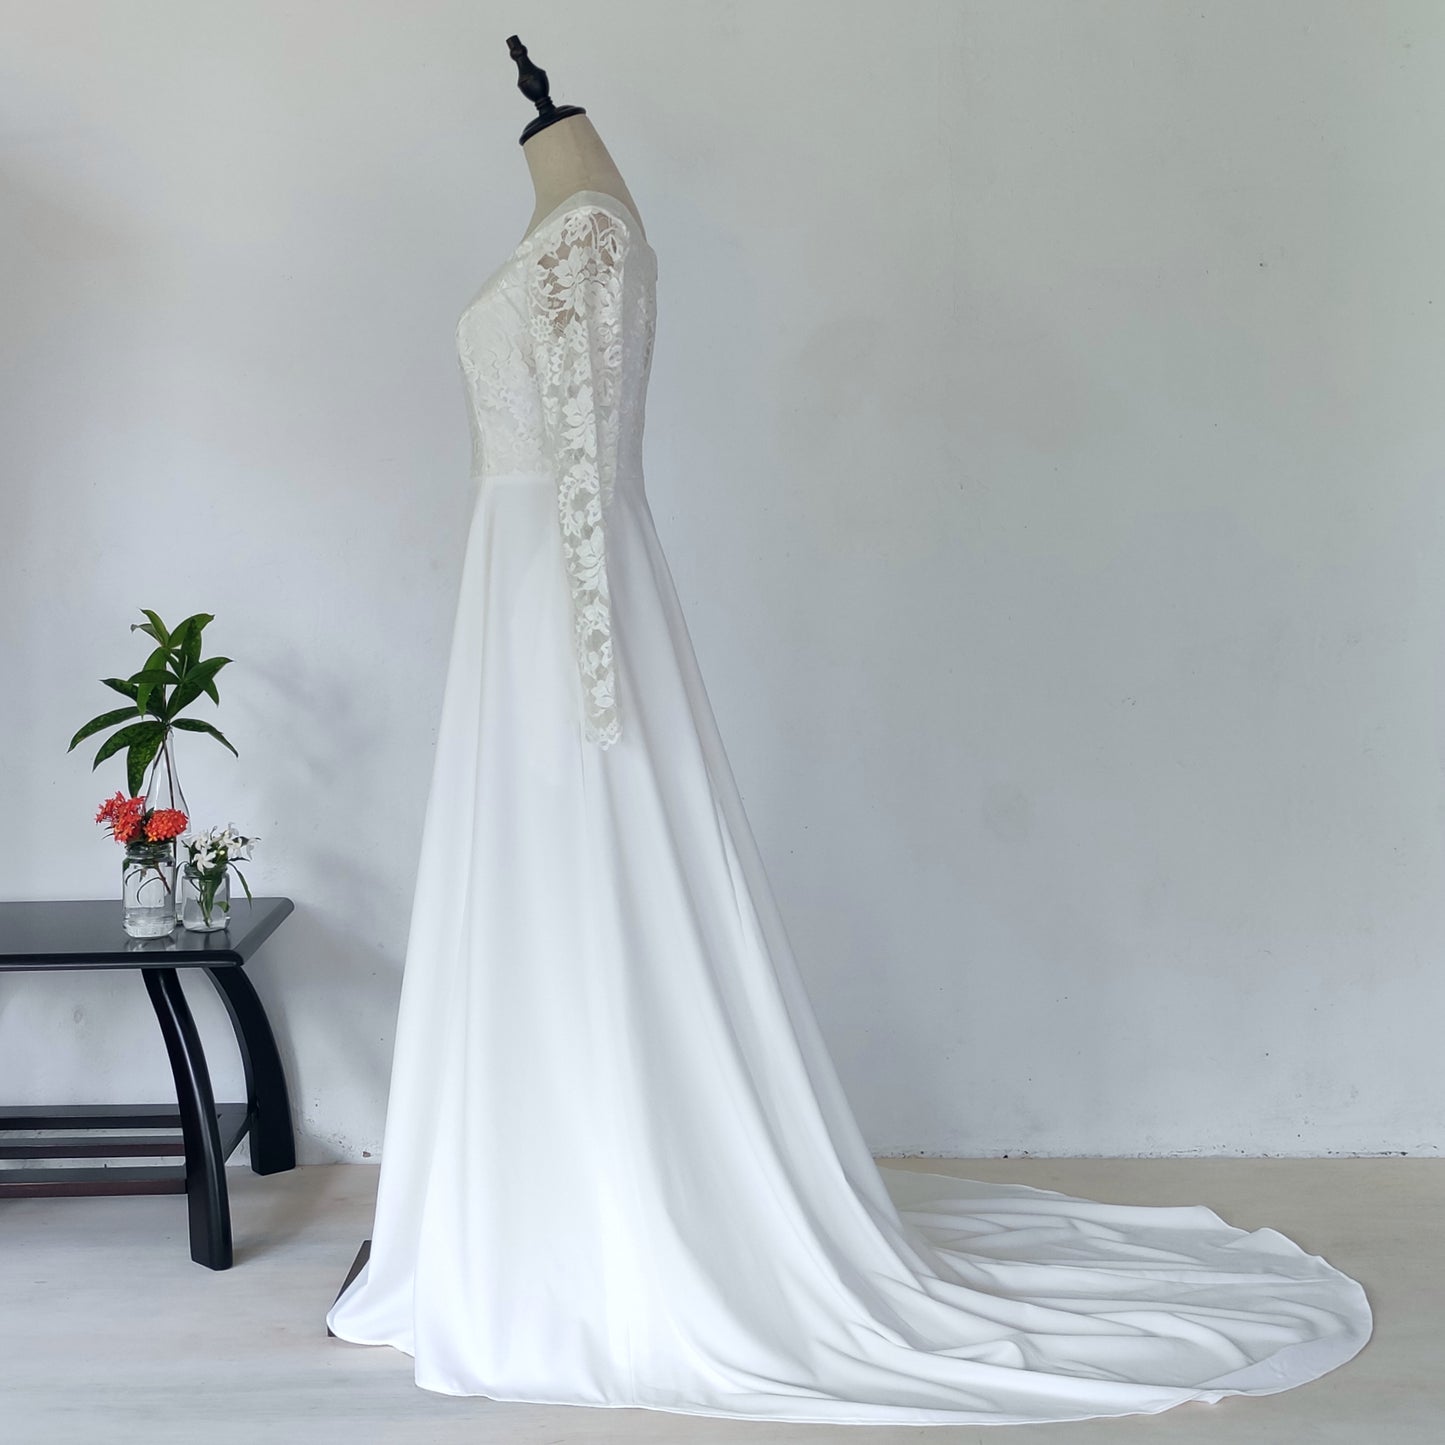 long sleeve A-line wedding dress with train - off white | posh affaires